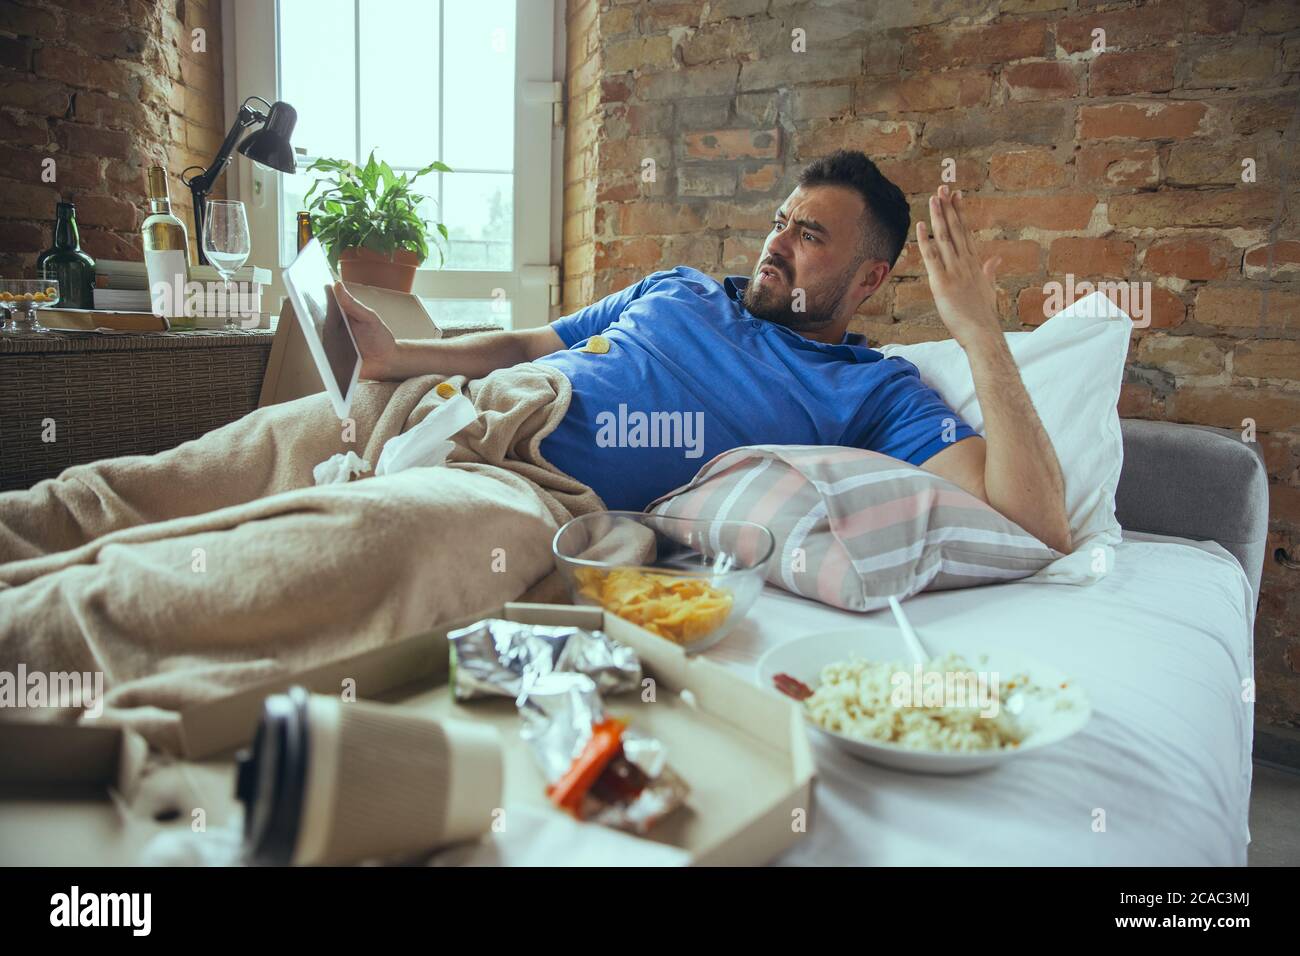 Angry watching tablet. Lazy caucasian man living in his bed surrounded with messy. No need to go out to be happy. Using gadgets, watching movie and series, social media, looks emotional. Home lifestyle. Stock Photo